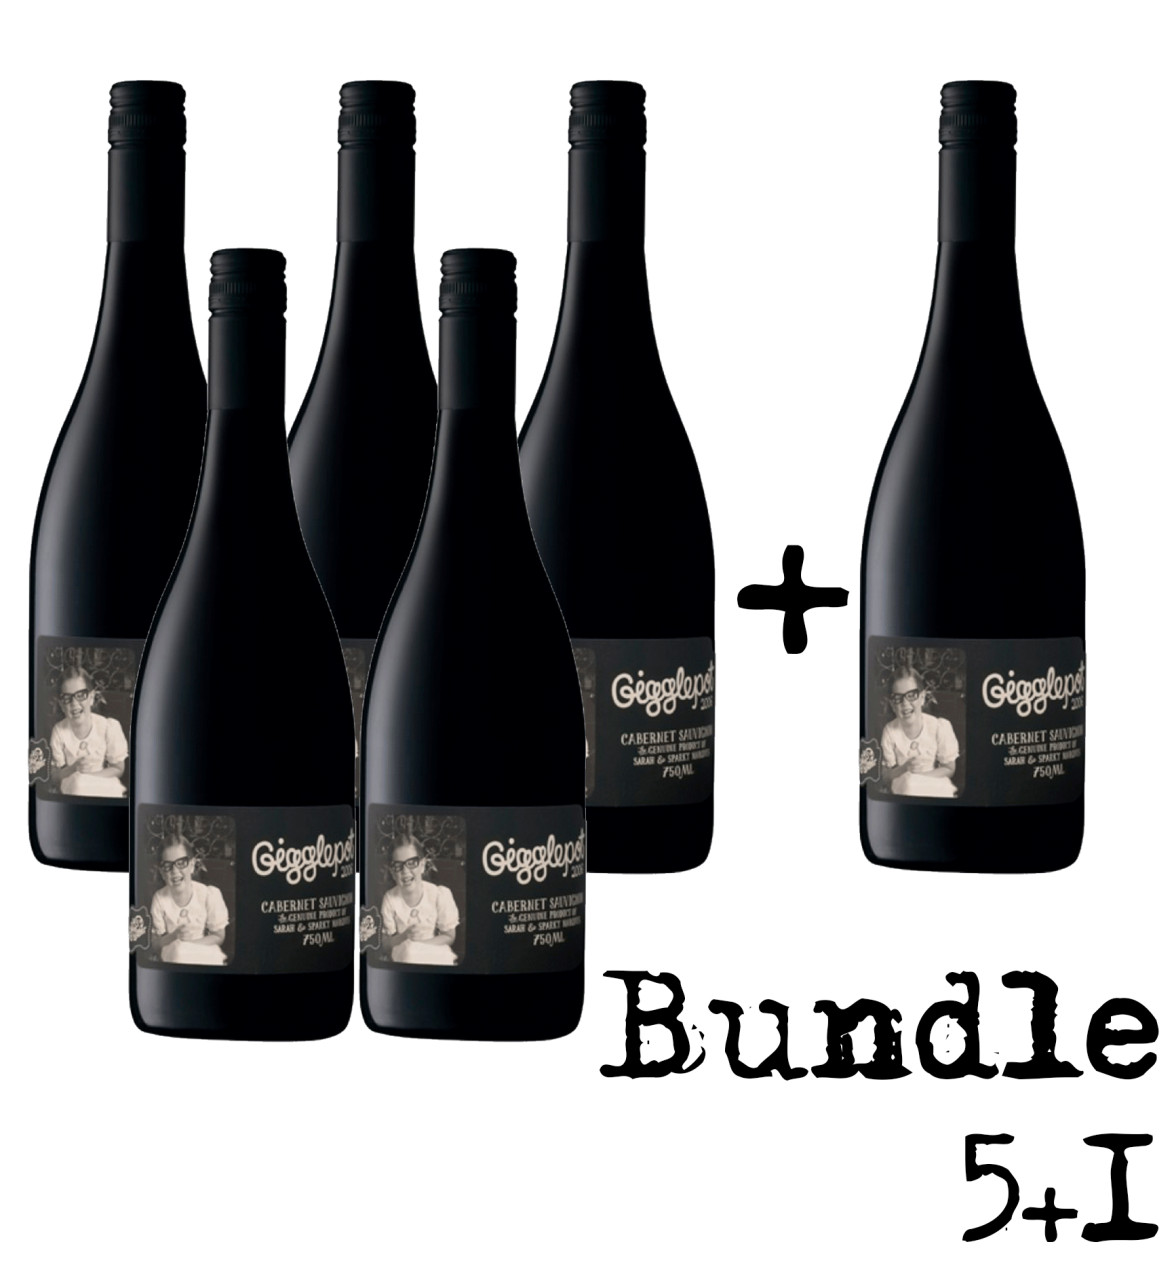 our | find+buy The wines wein.plus members wein.plus of find+buy: